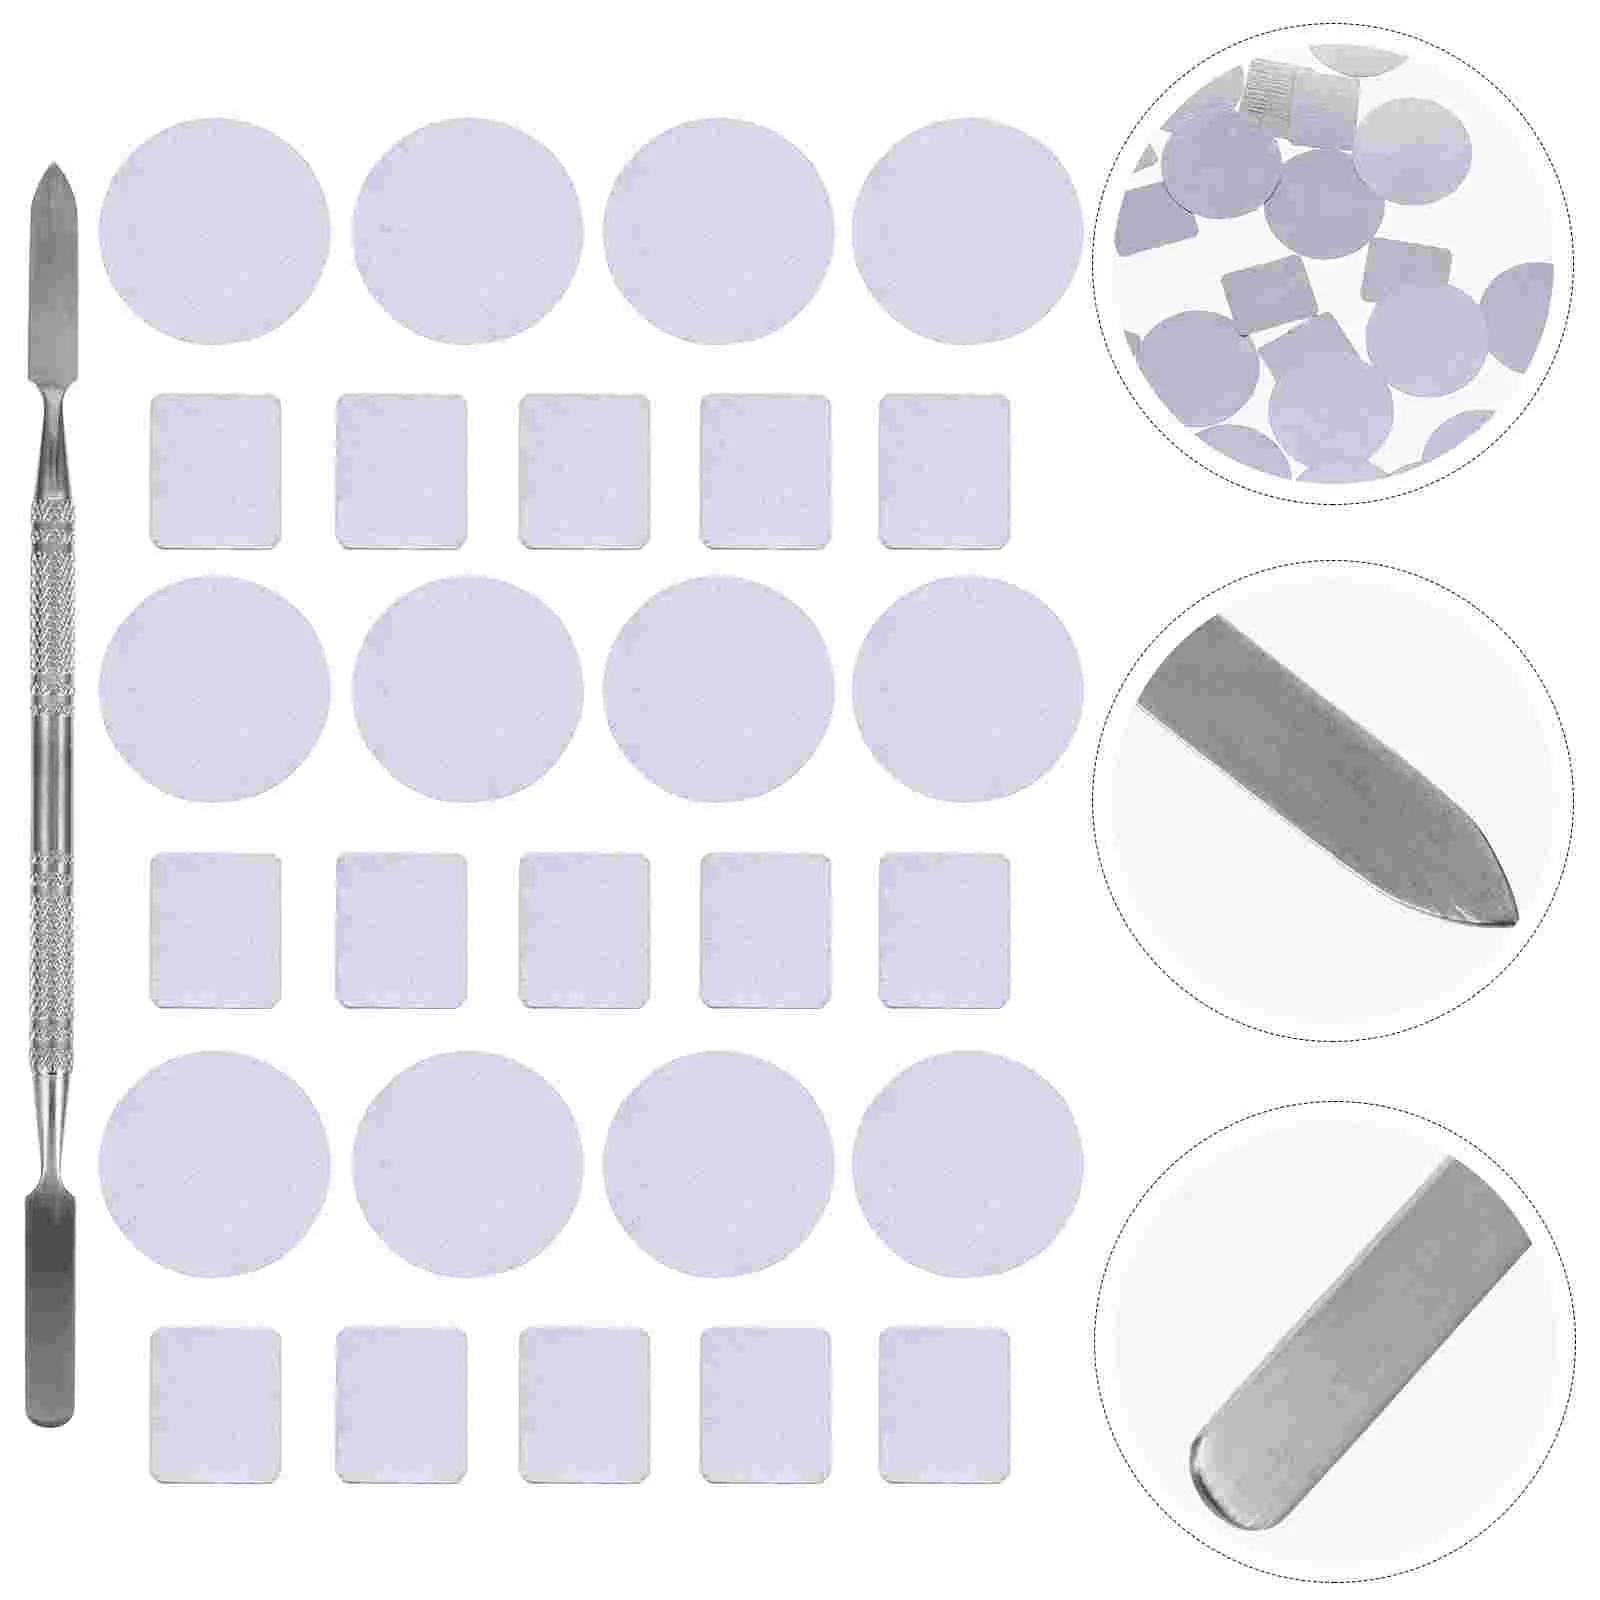 56pcs Empty Magnetic Palettes Metal Stickers for Eyeshadow Pan Makeup Tool Magnets Palettes